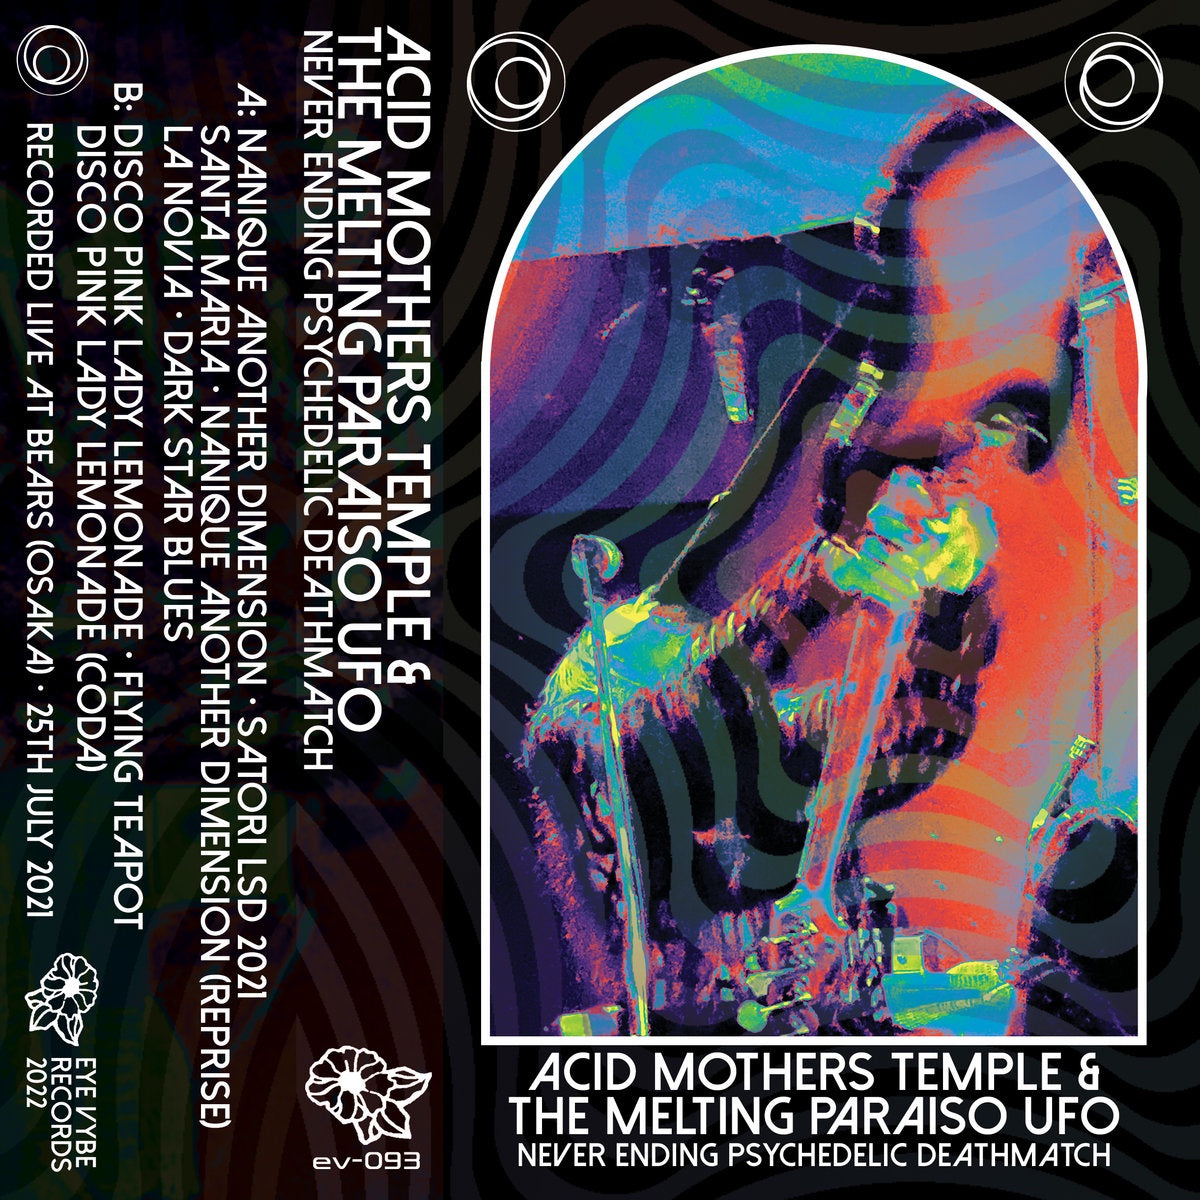 Acid Mothers Temple & The Melting Paraiso UFO – Never Ending Psychedelic Deathmatch - New Cassette 2022 Eye Vybe Orange Tape - Psychedelic Rock